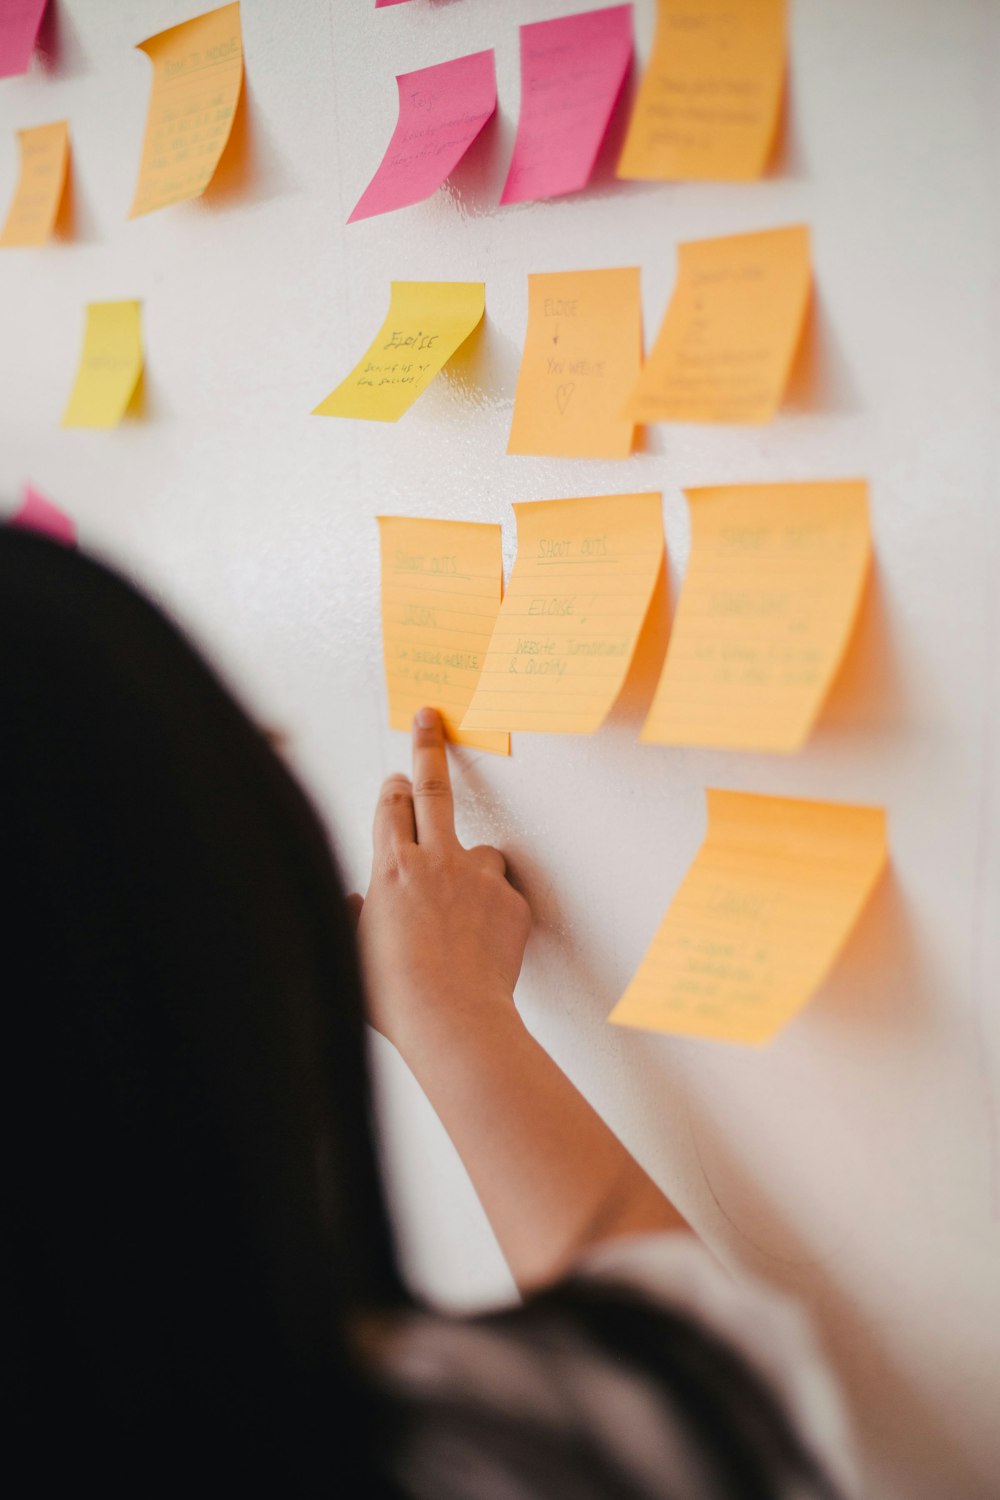 999+ Sticky Notes Pictures  Download Free Images on Unsplash